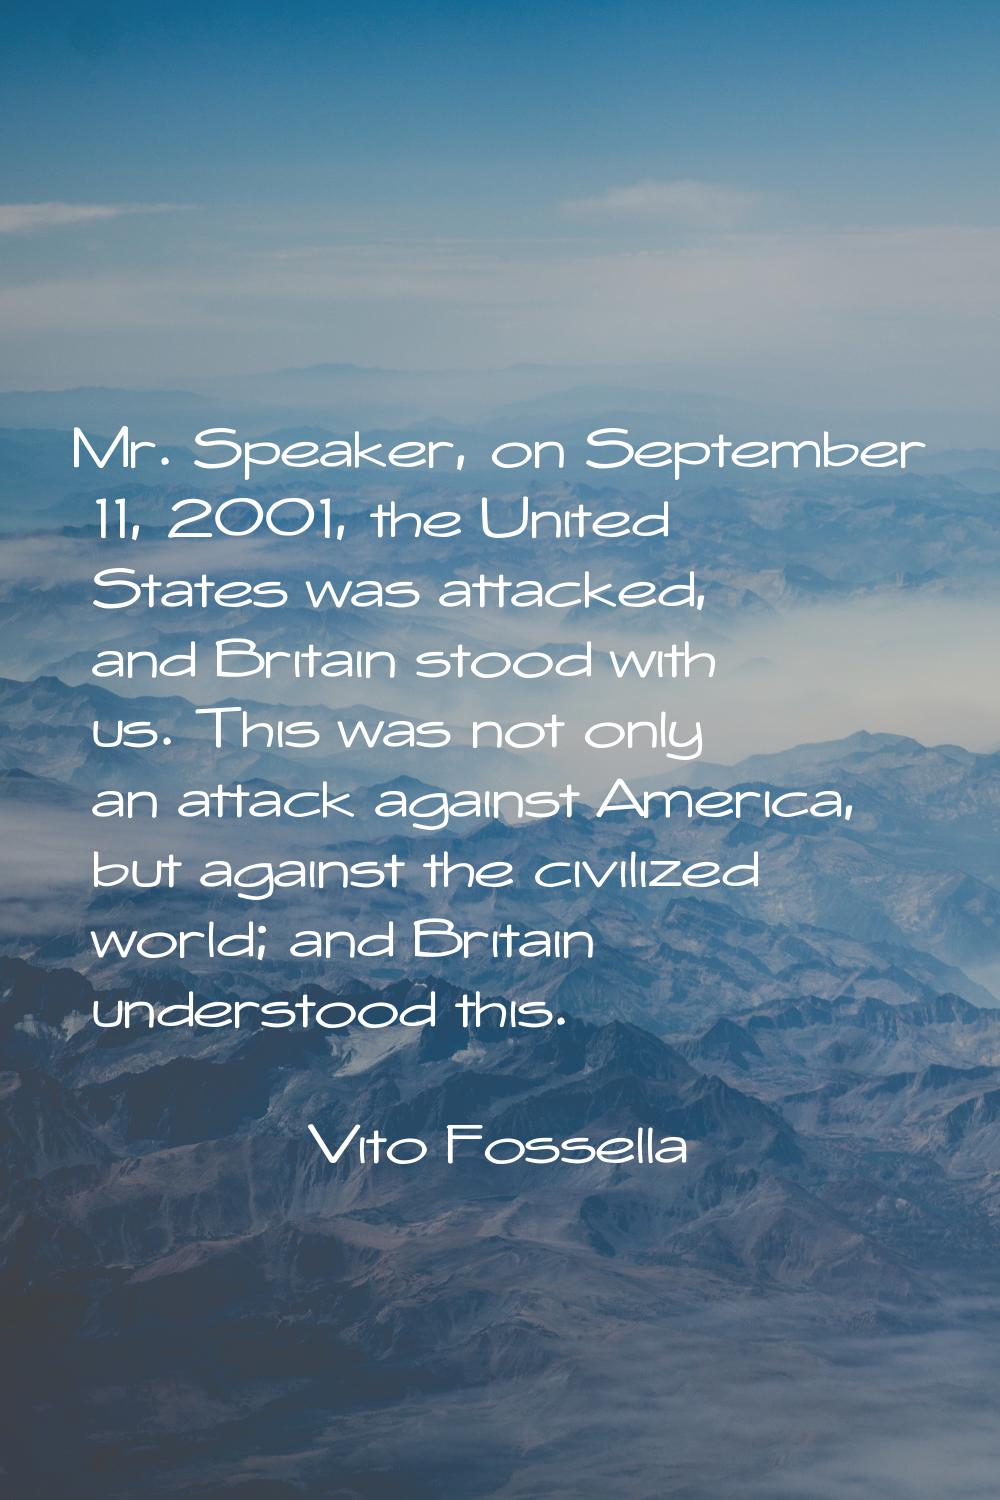 Mr. Speaker, on September 11, 2001, the United States was attacked, and Britain stood with us. This